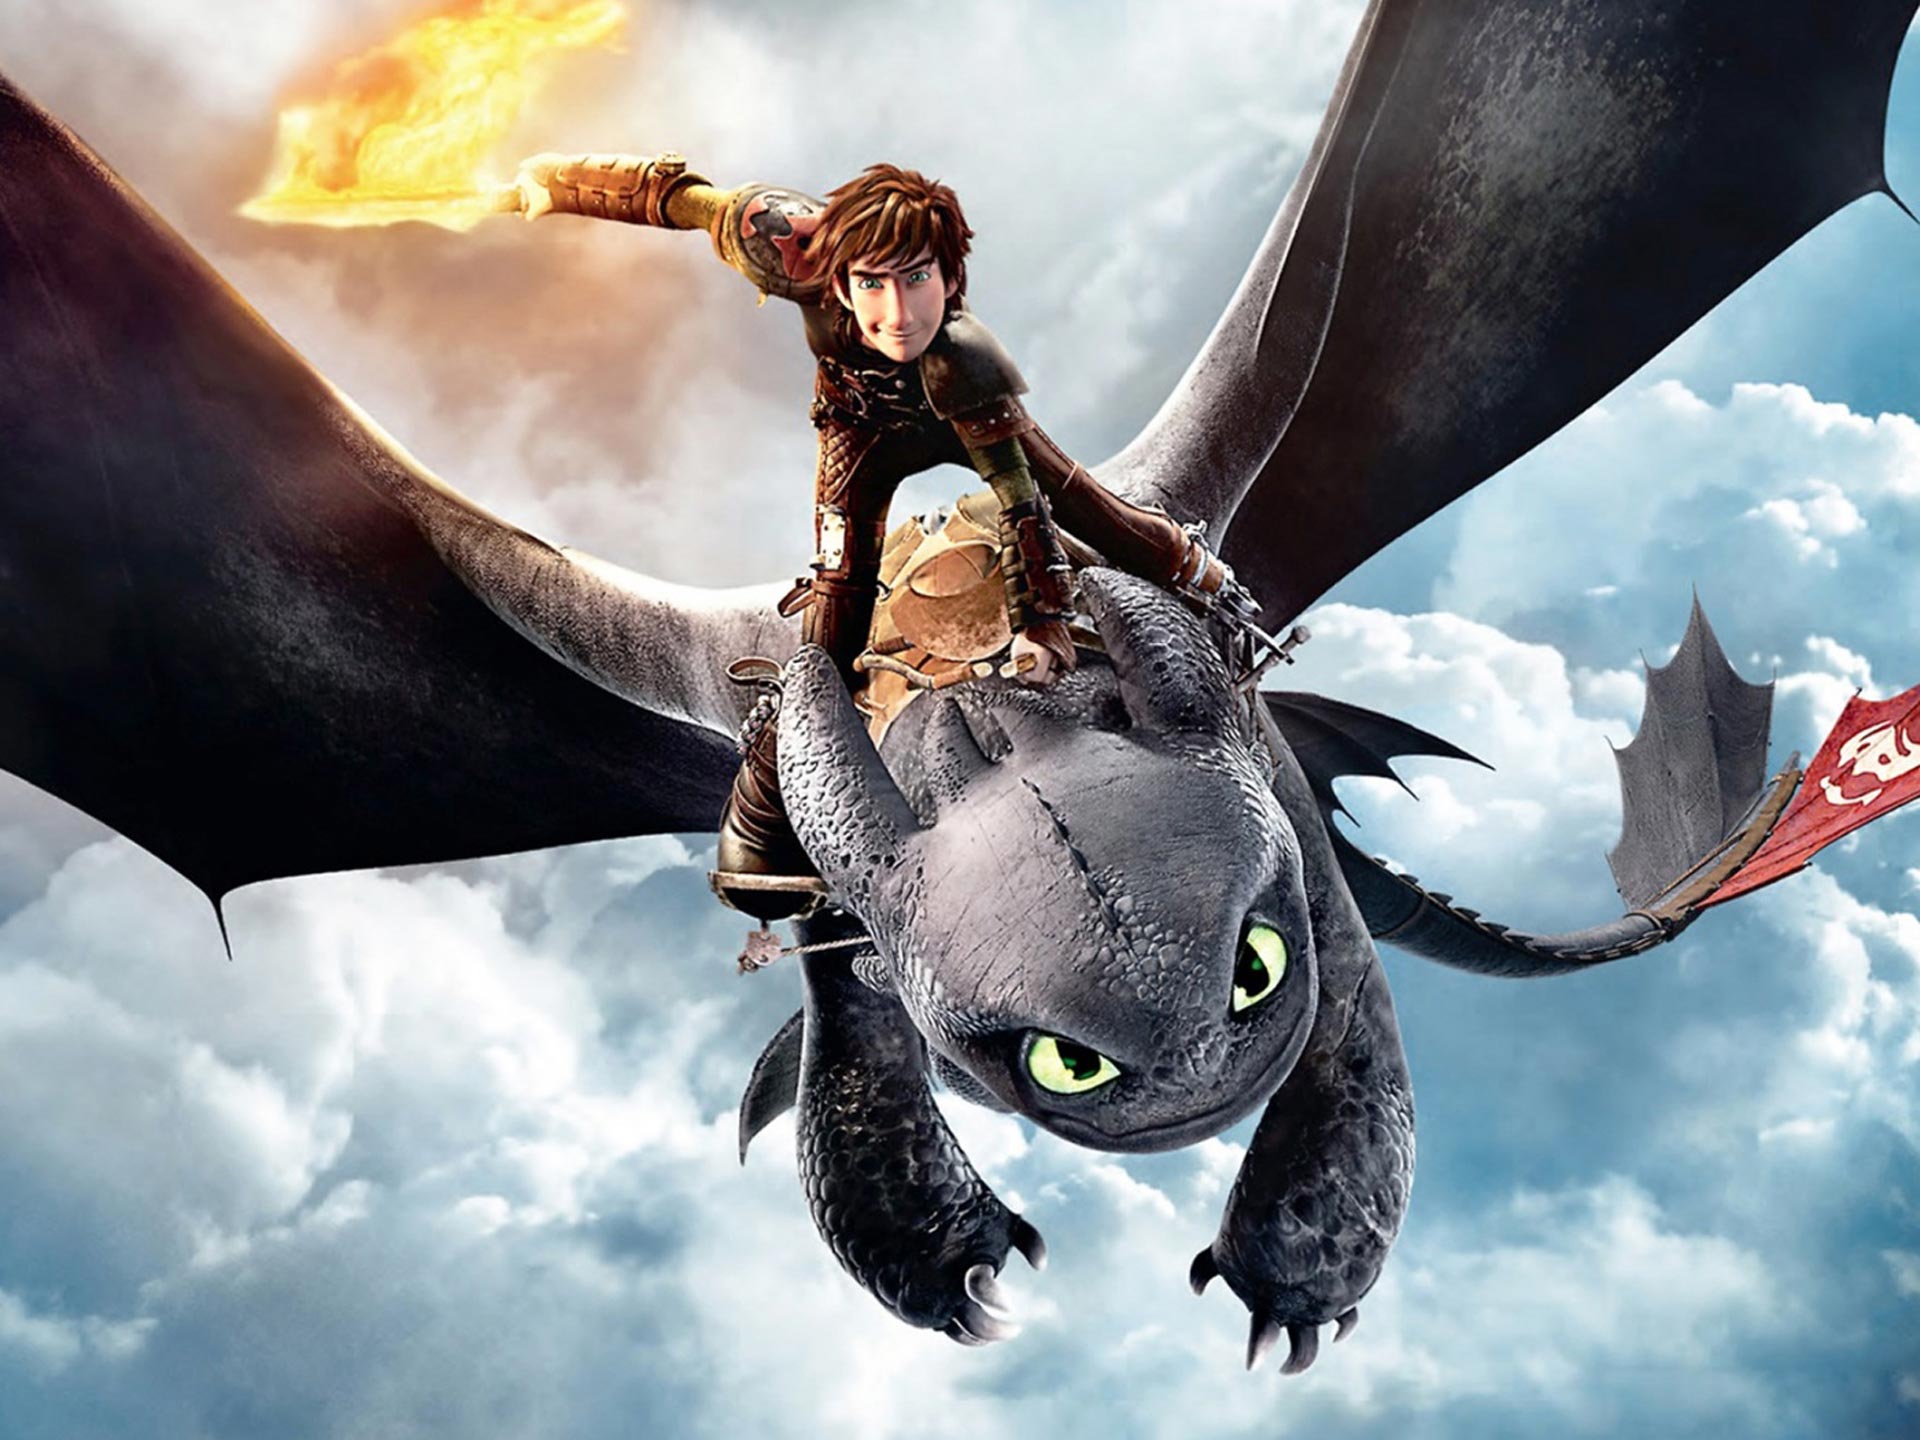 How To Train Your Dragon HD Wallpaper Free Download Your